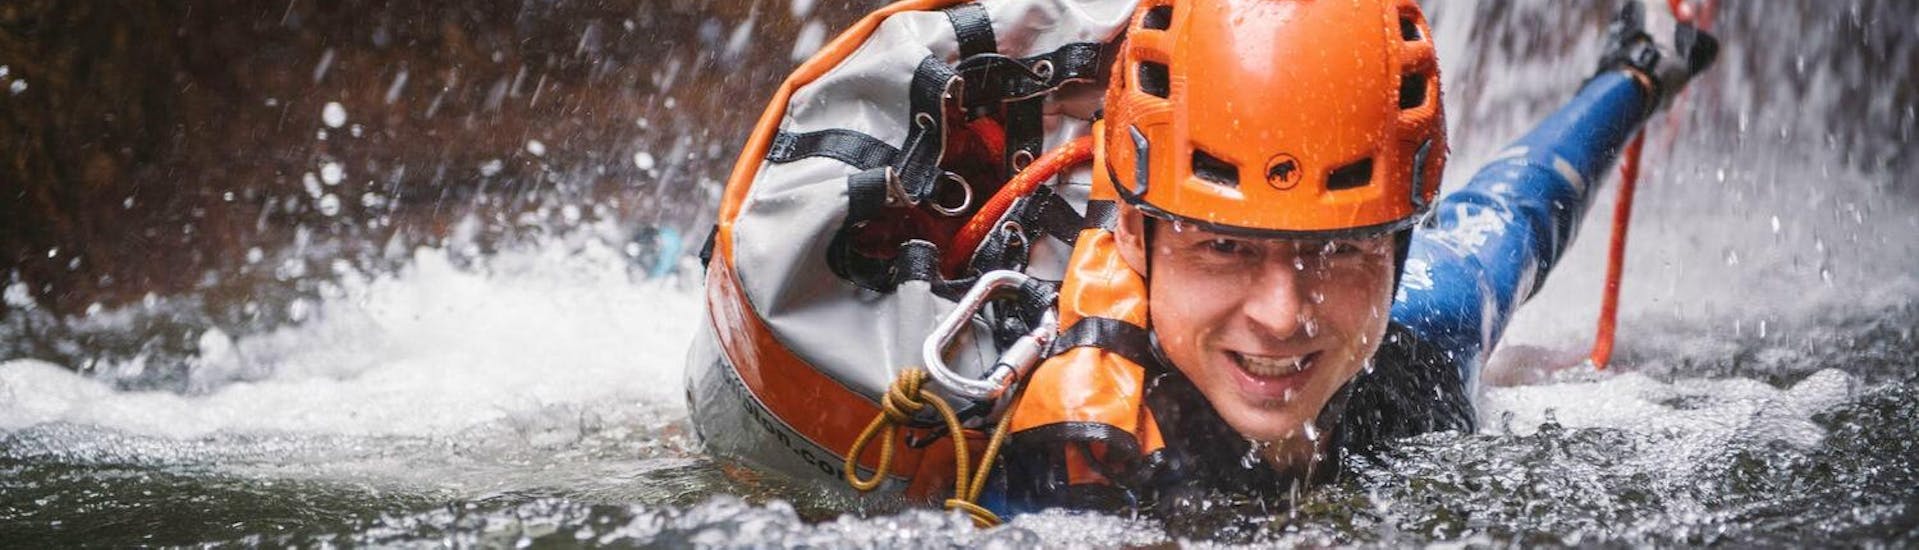 canyoning-for-thrill-seekers-deep-roots-adventures-hero